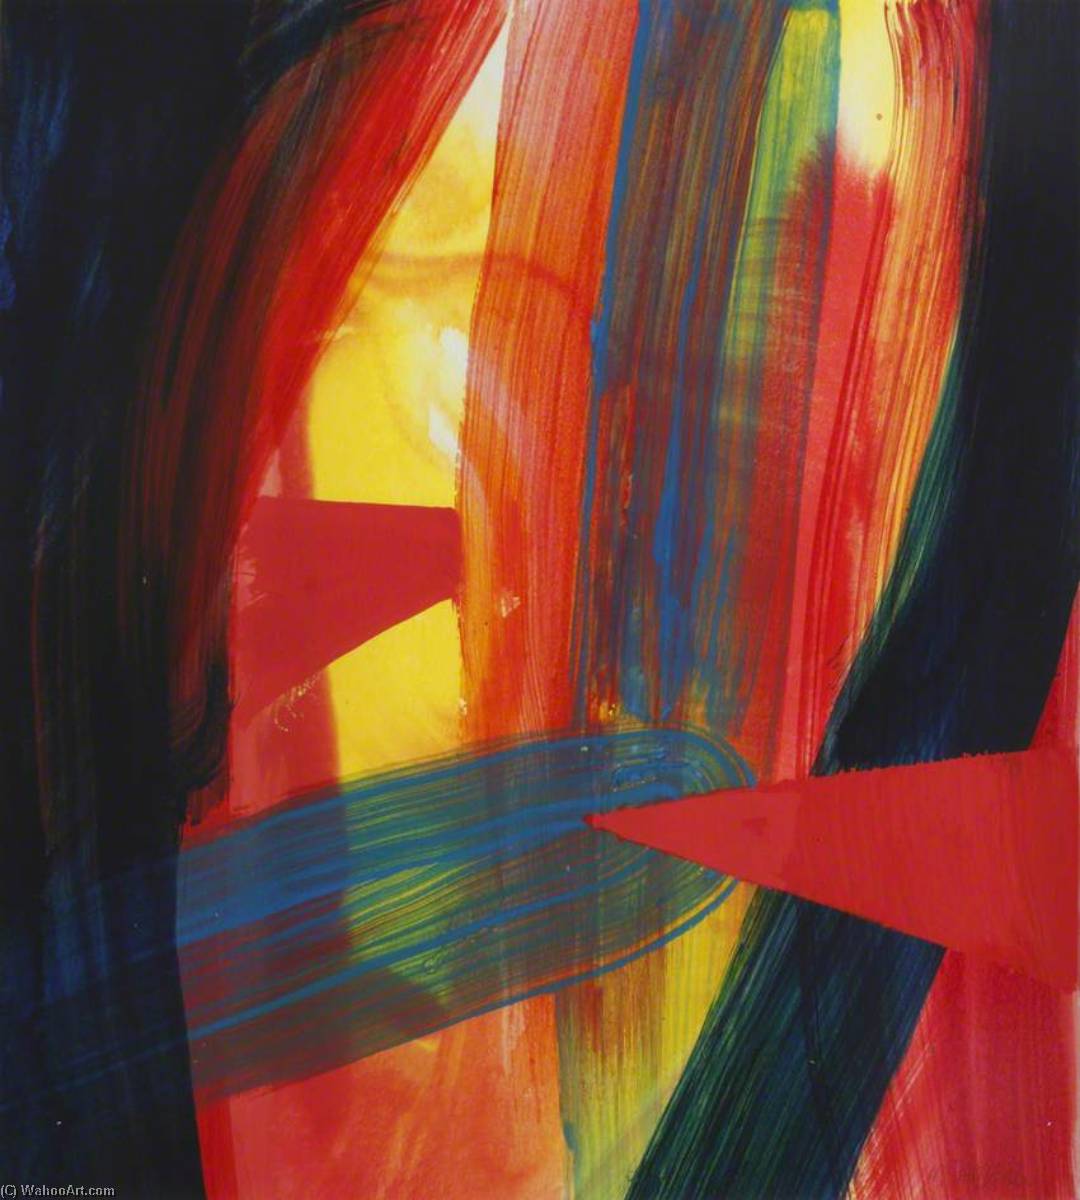 WikiOO.org - Encyclopedia of Fine Arts - Lukisan, Artwork Mark Rowan Hull - Red, Blue and Yellow Abstract with Red Triangle